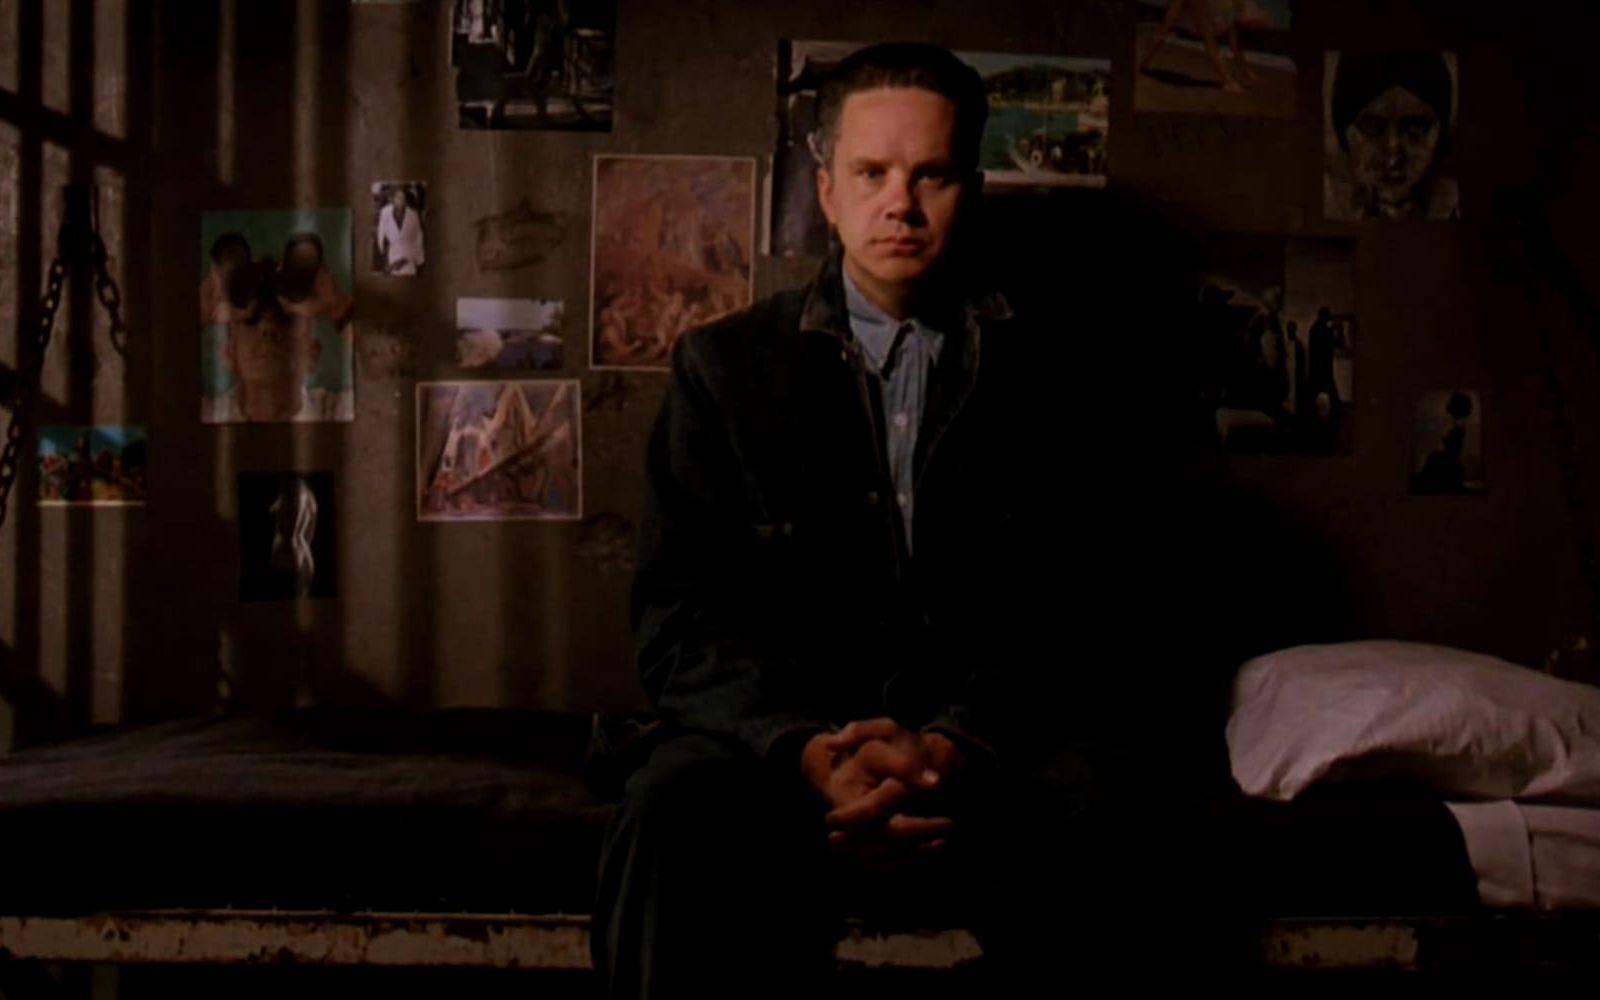 "Get busy living, or get busy dying." — Tim Robbins som Andy Dufresne i Nyckeln till frihet, 1994